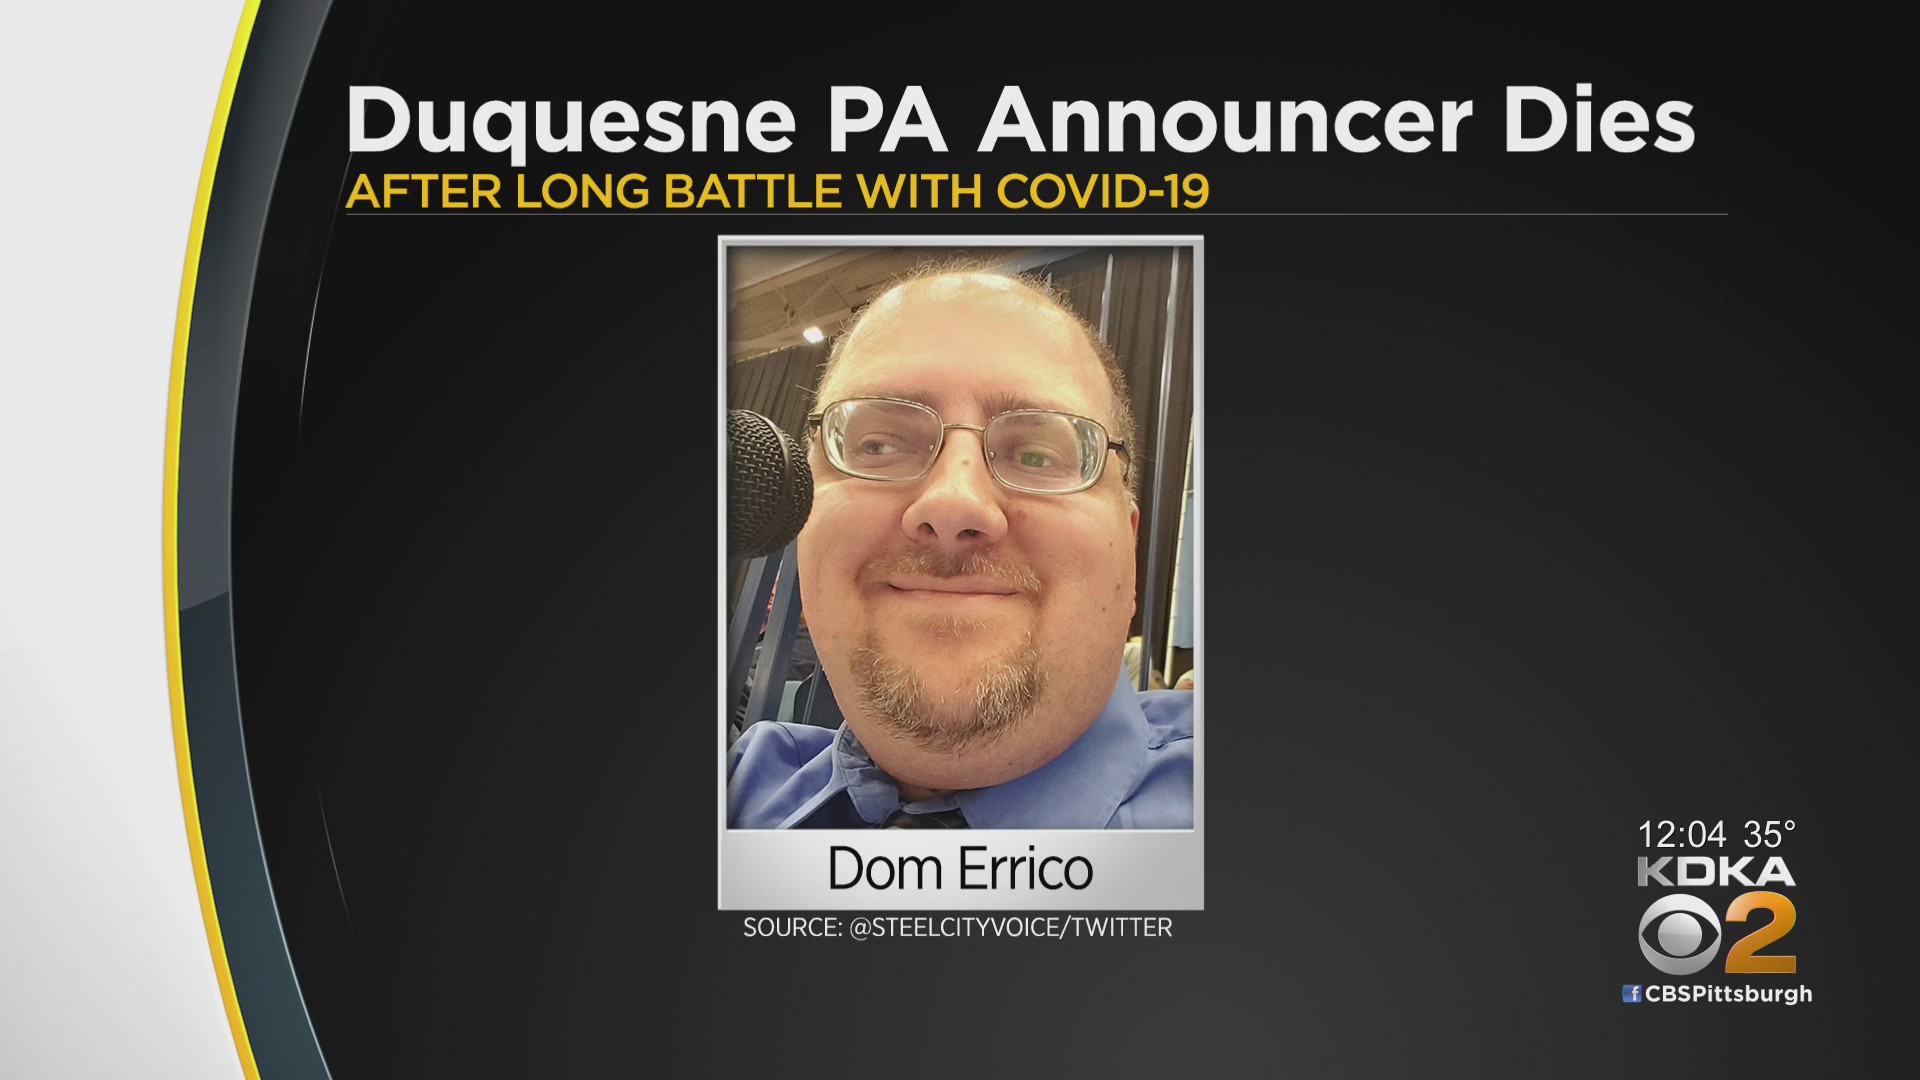 Dom Errico, Duquesne’s basketball announcer, dies of complications from COVID-19